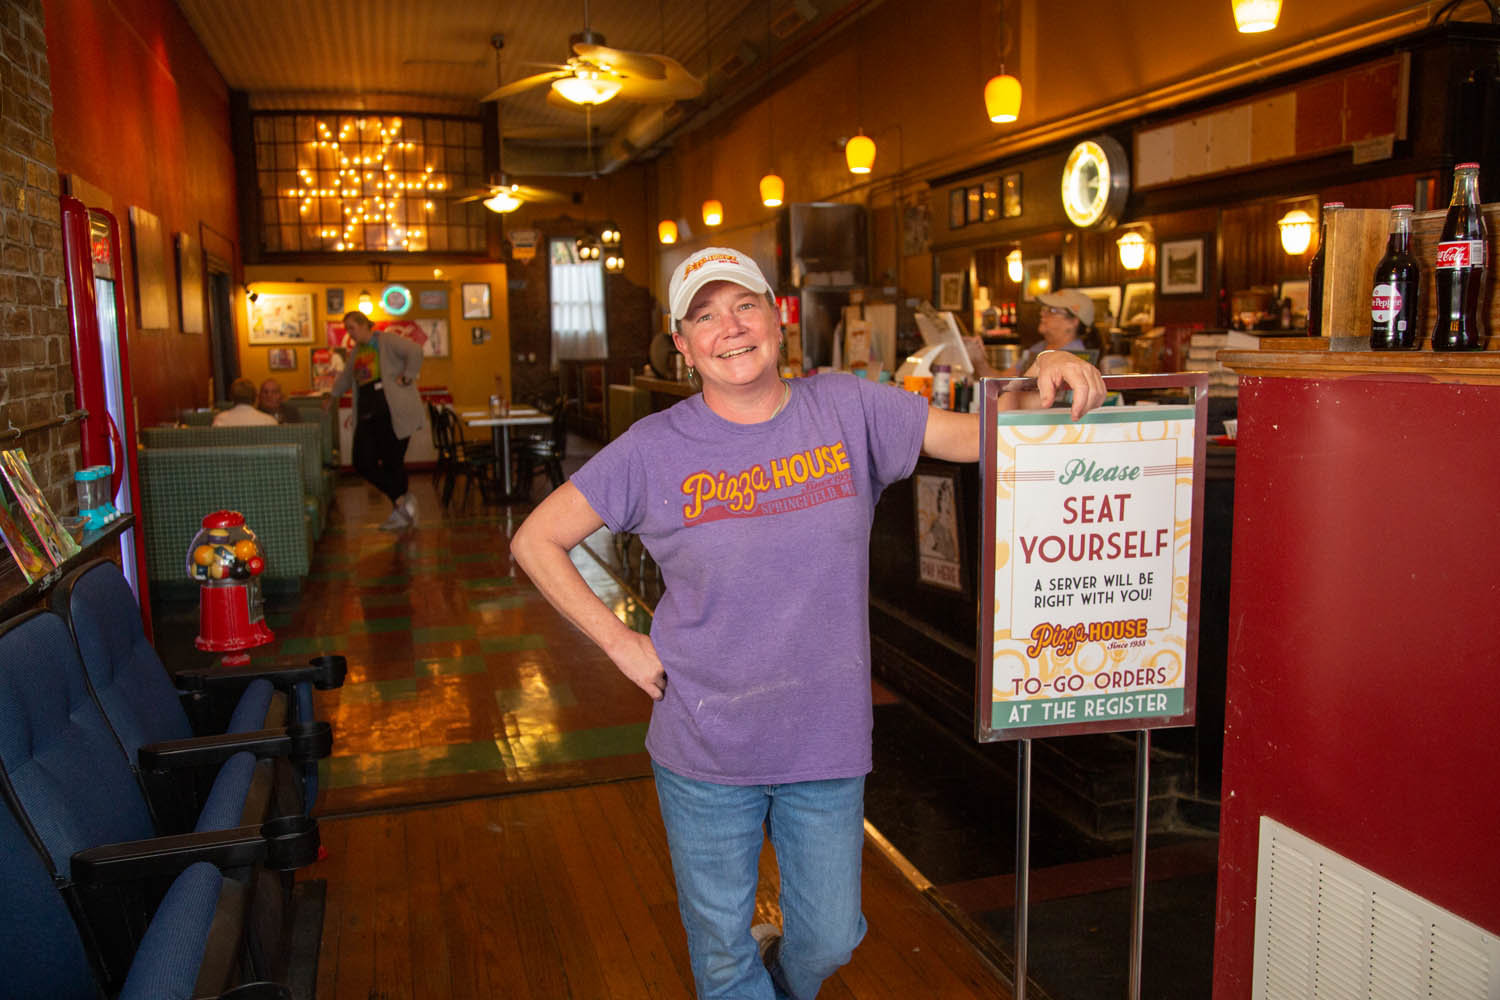 CONSISTENT STYLE: Pizza House, owned by Stacey Schneider since 2008, continues serving up the same thin crust style of pizza it began making over six decades ago.